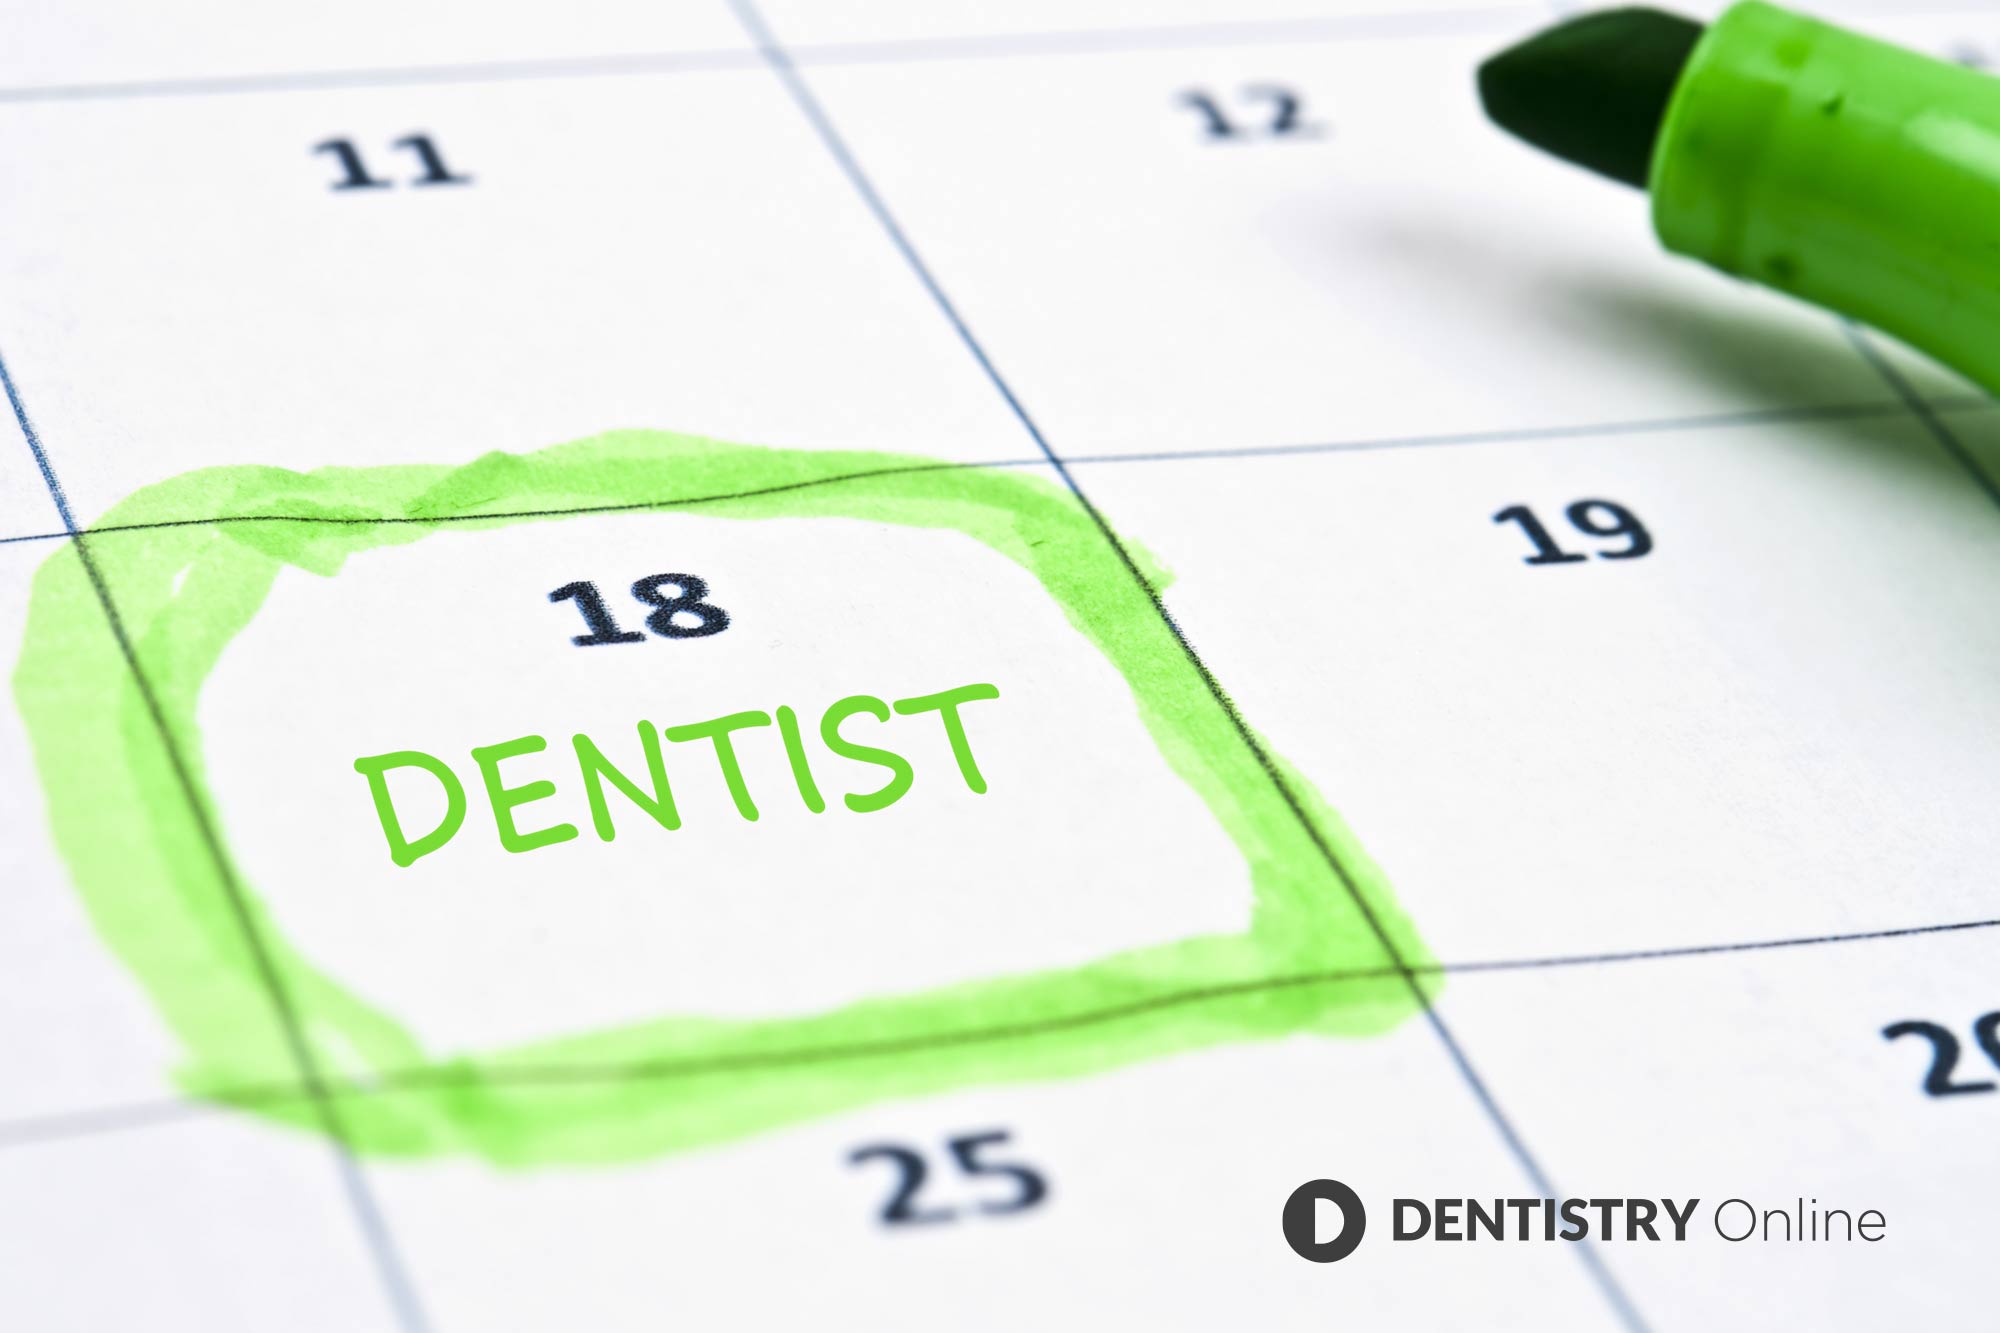 The number of missed dental appointments in England has hit 14 million